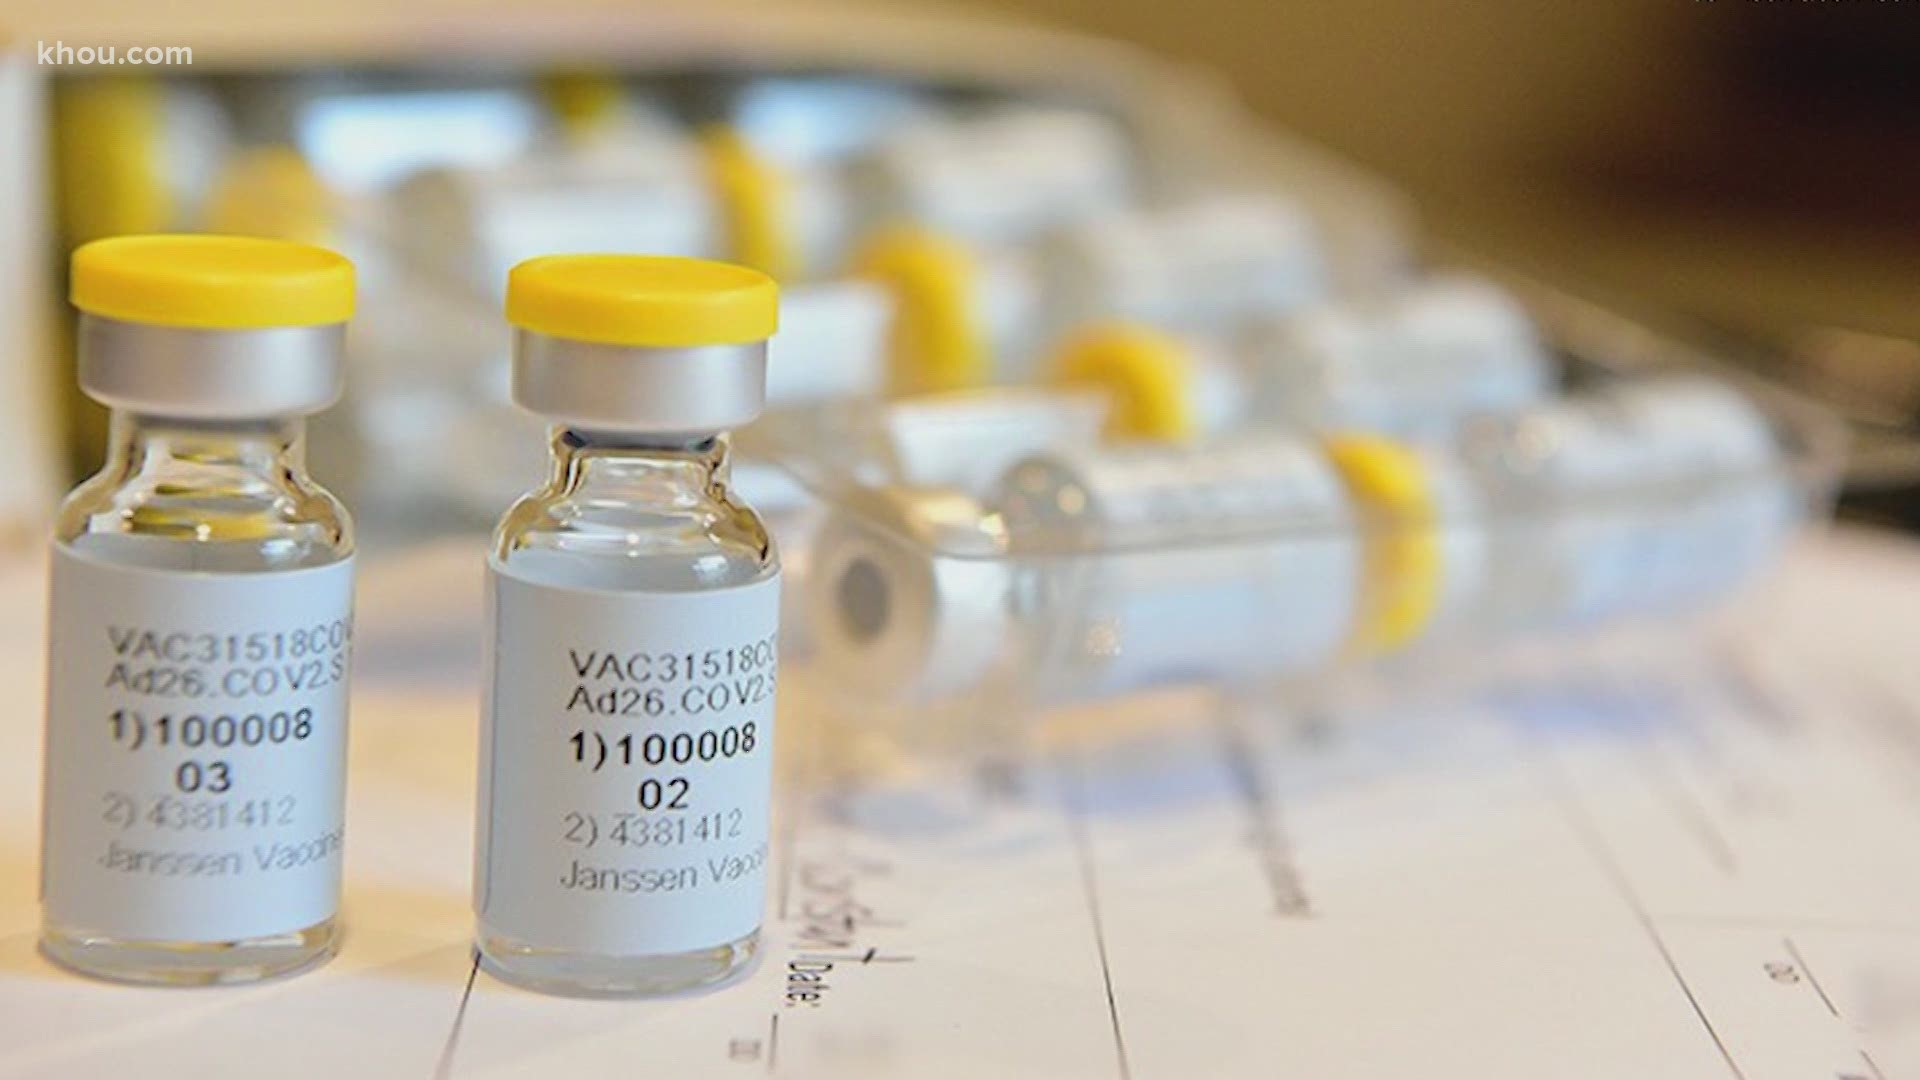 Experts say Johnson & Johnson’s vaccine could be a game-changer since it only requires one shot and does not require ultra-cold storage, like the Pfizer shots.